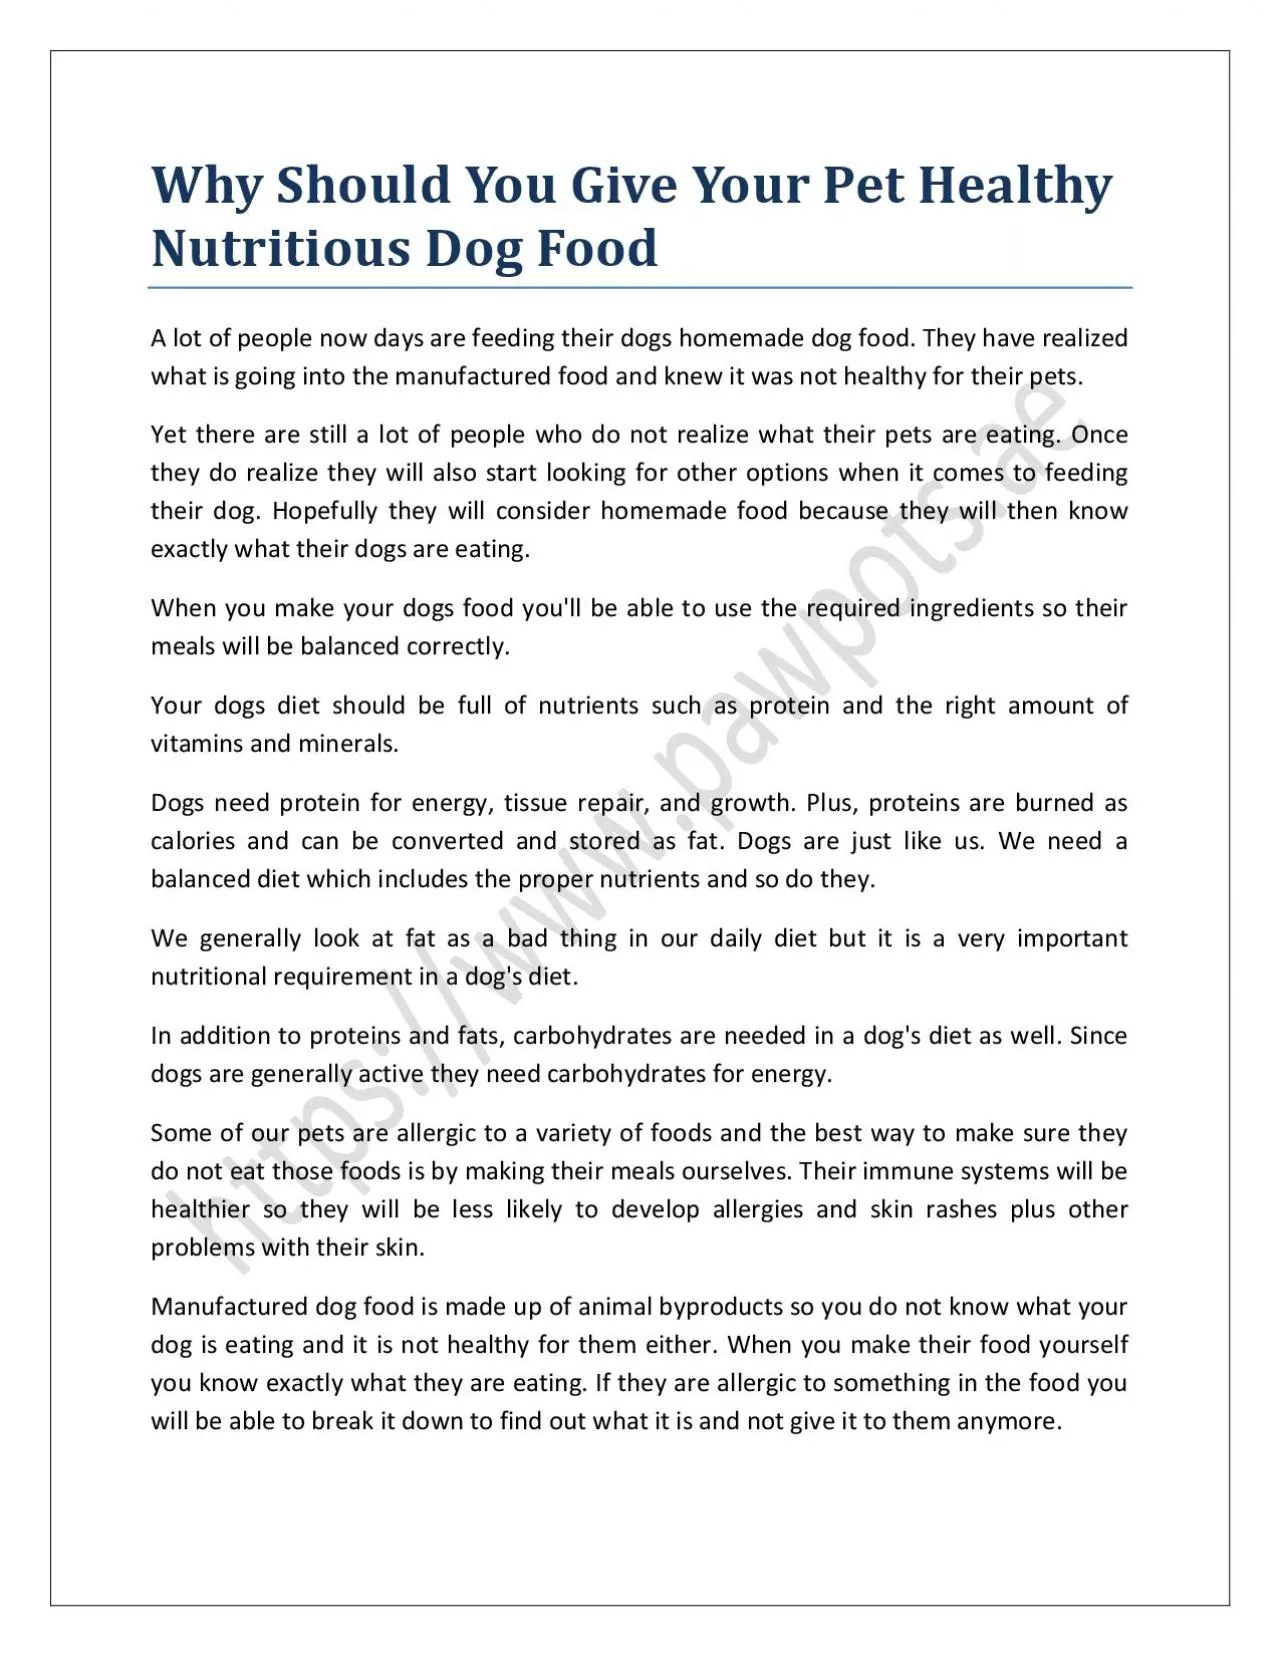 Why Should You Give Your Pet Healthy Nutritious Dog Food